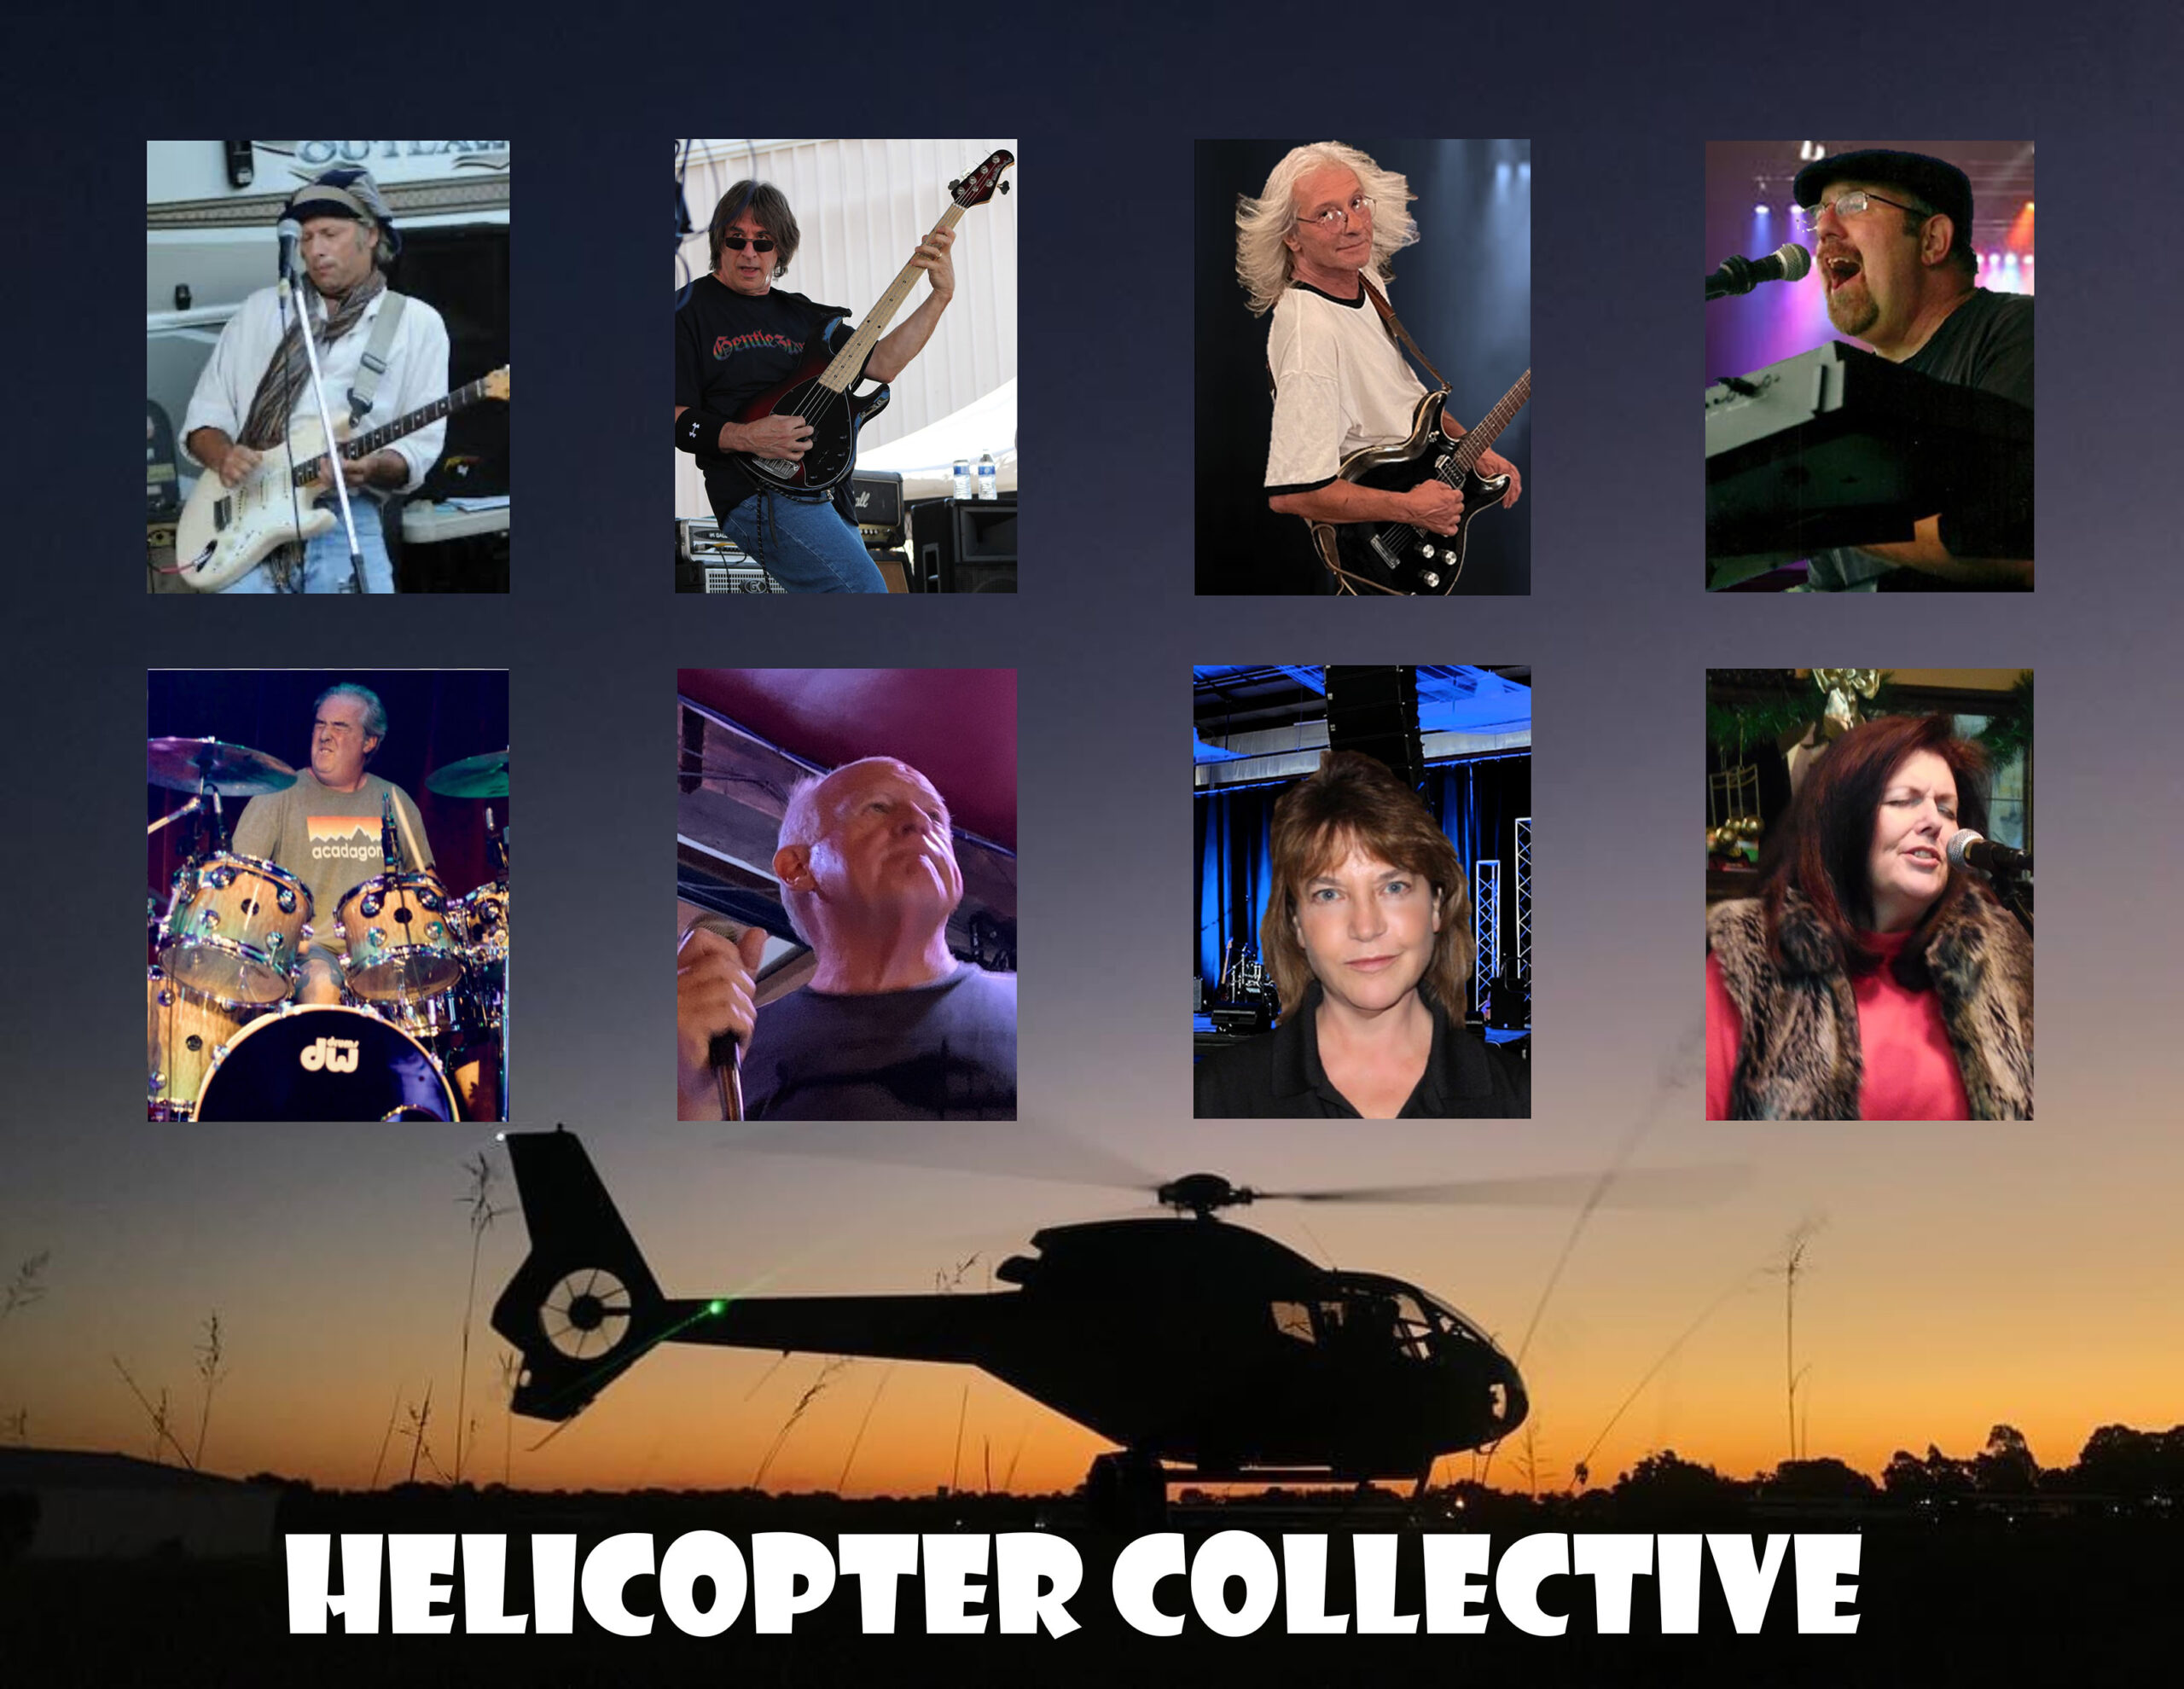 The Helicopter Collective Promo